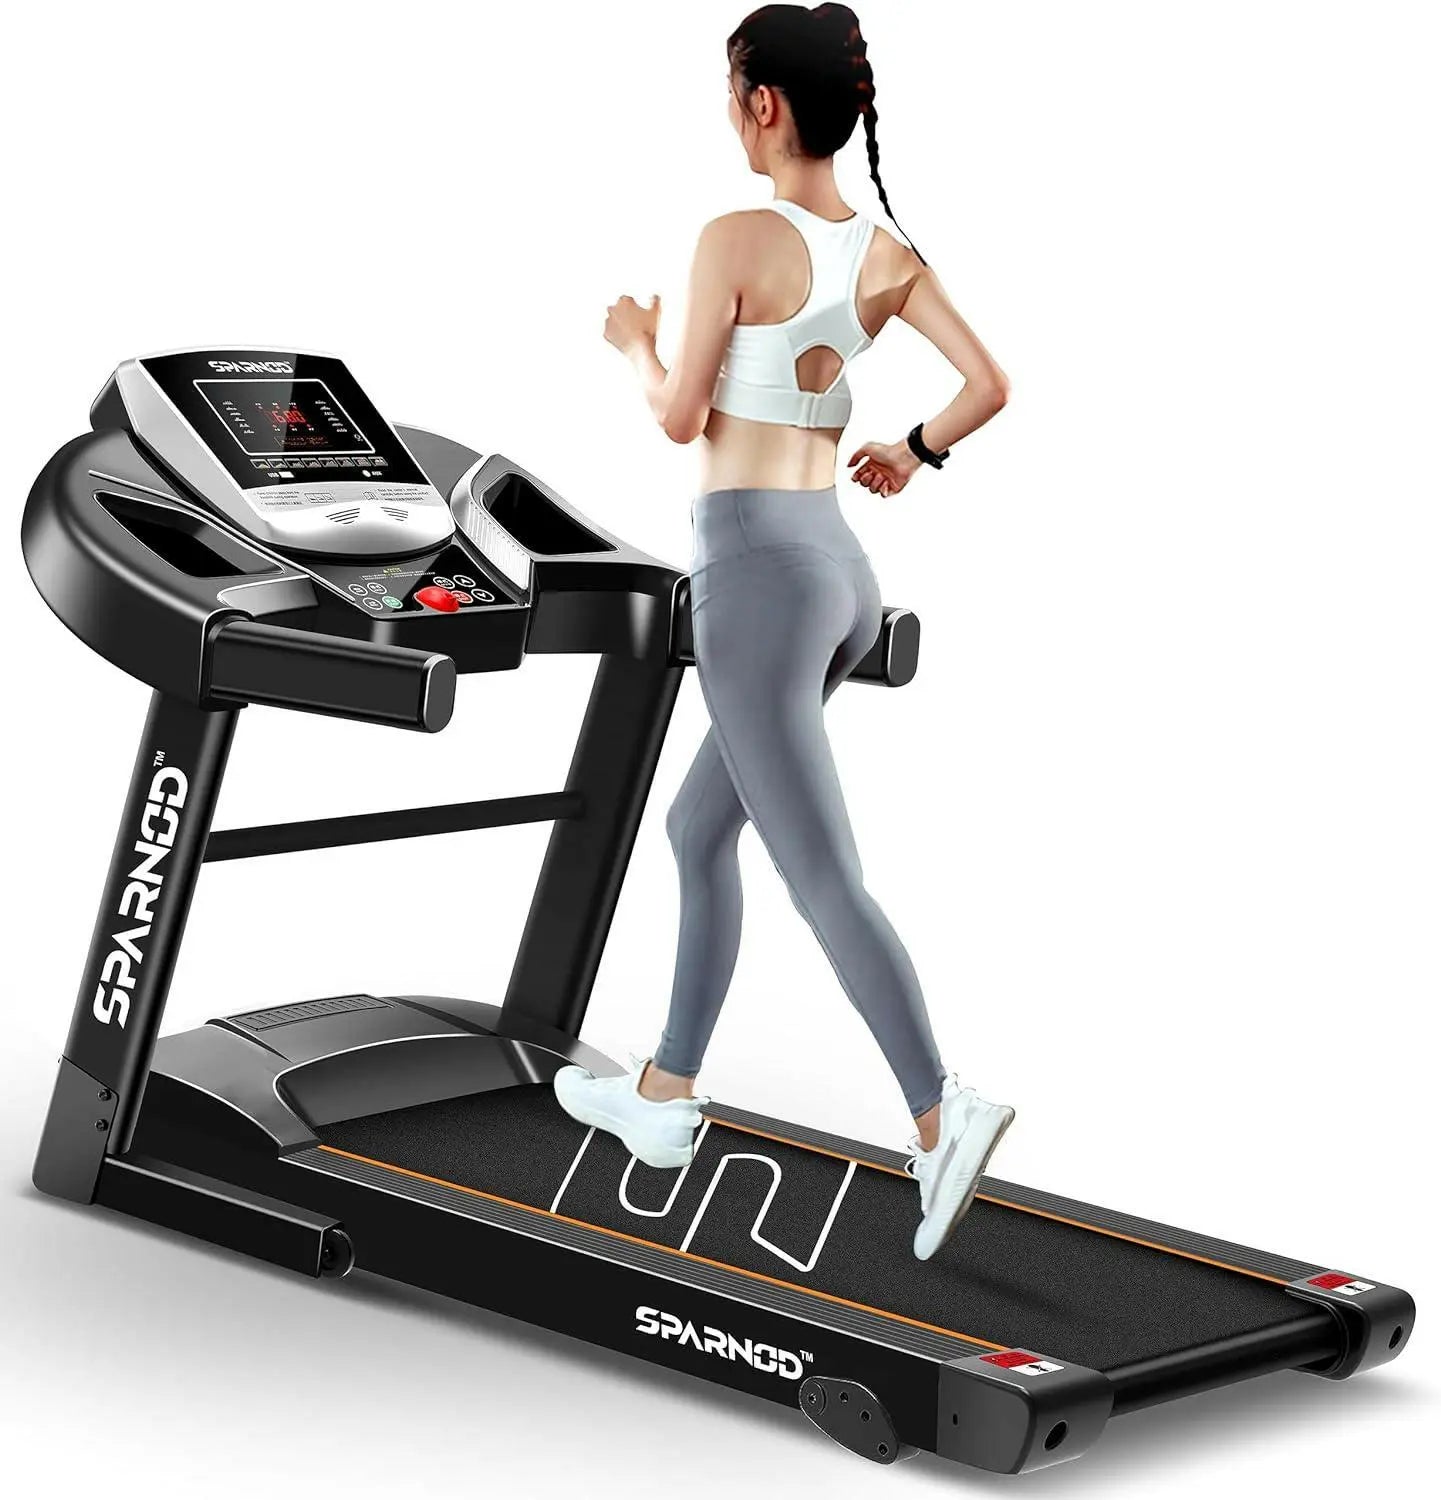 Sparnod Fitness STH-1200 Series (3 Hp Peak) Automatic Motorised Treadmill for Home Use | Speed-12Km/Hr | Max User Weight 100 Kg | 3 Level Manual